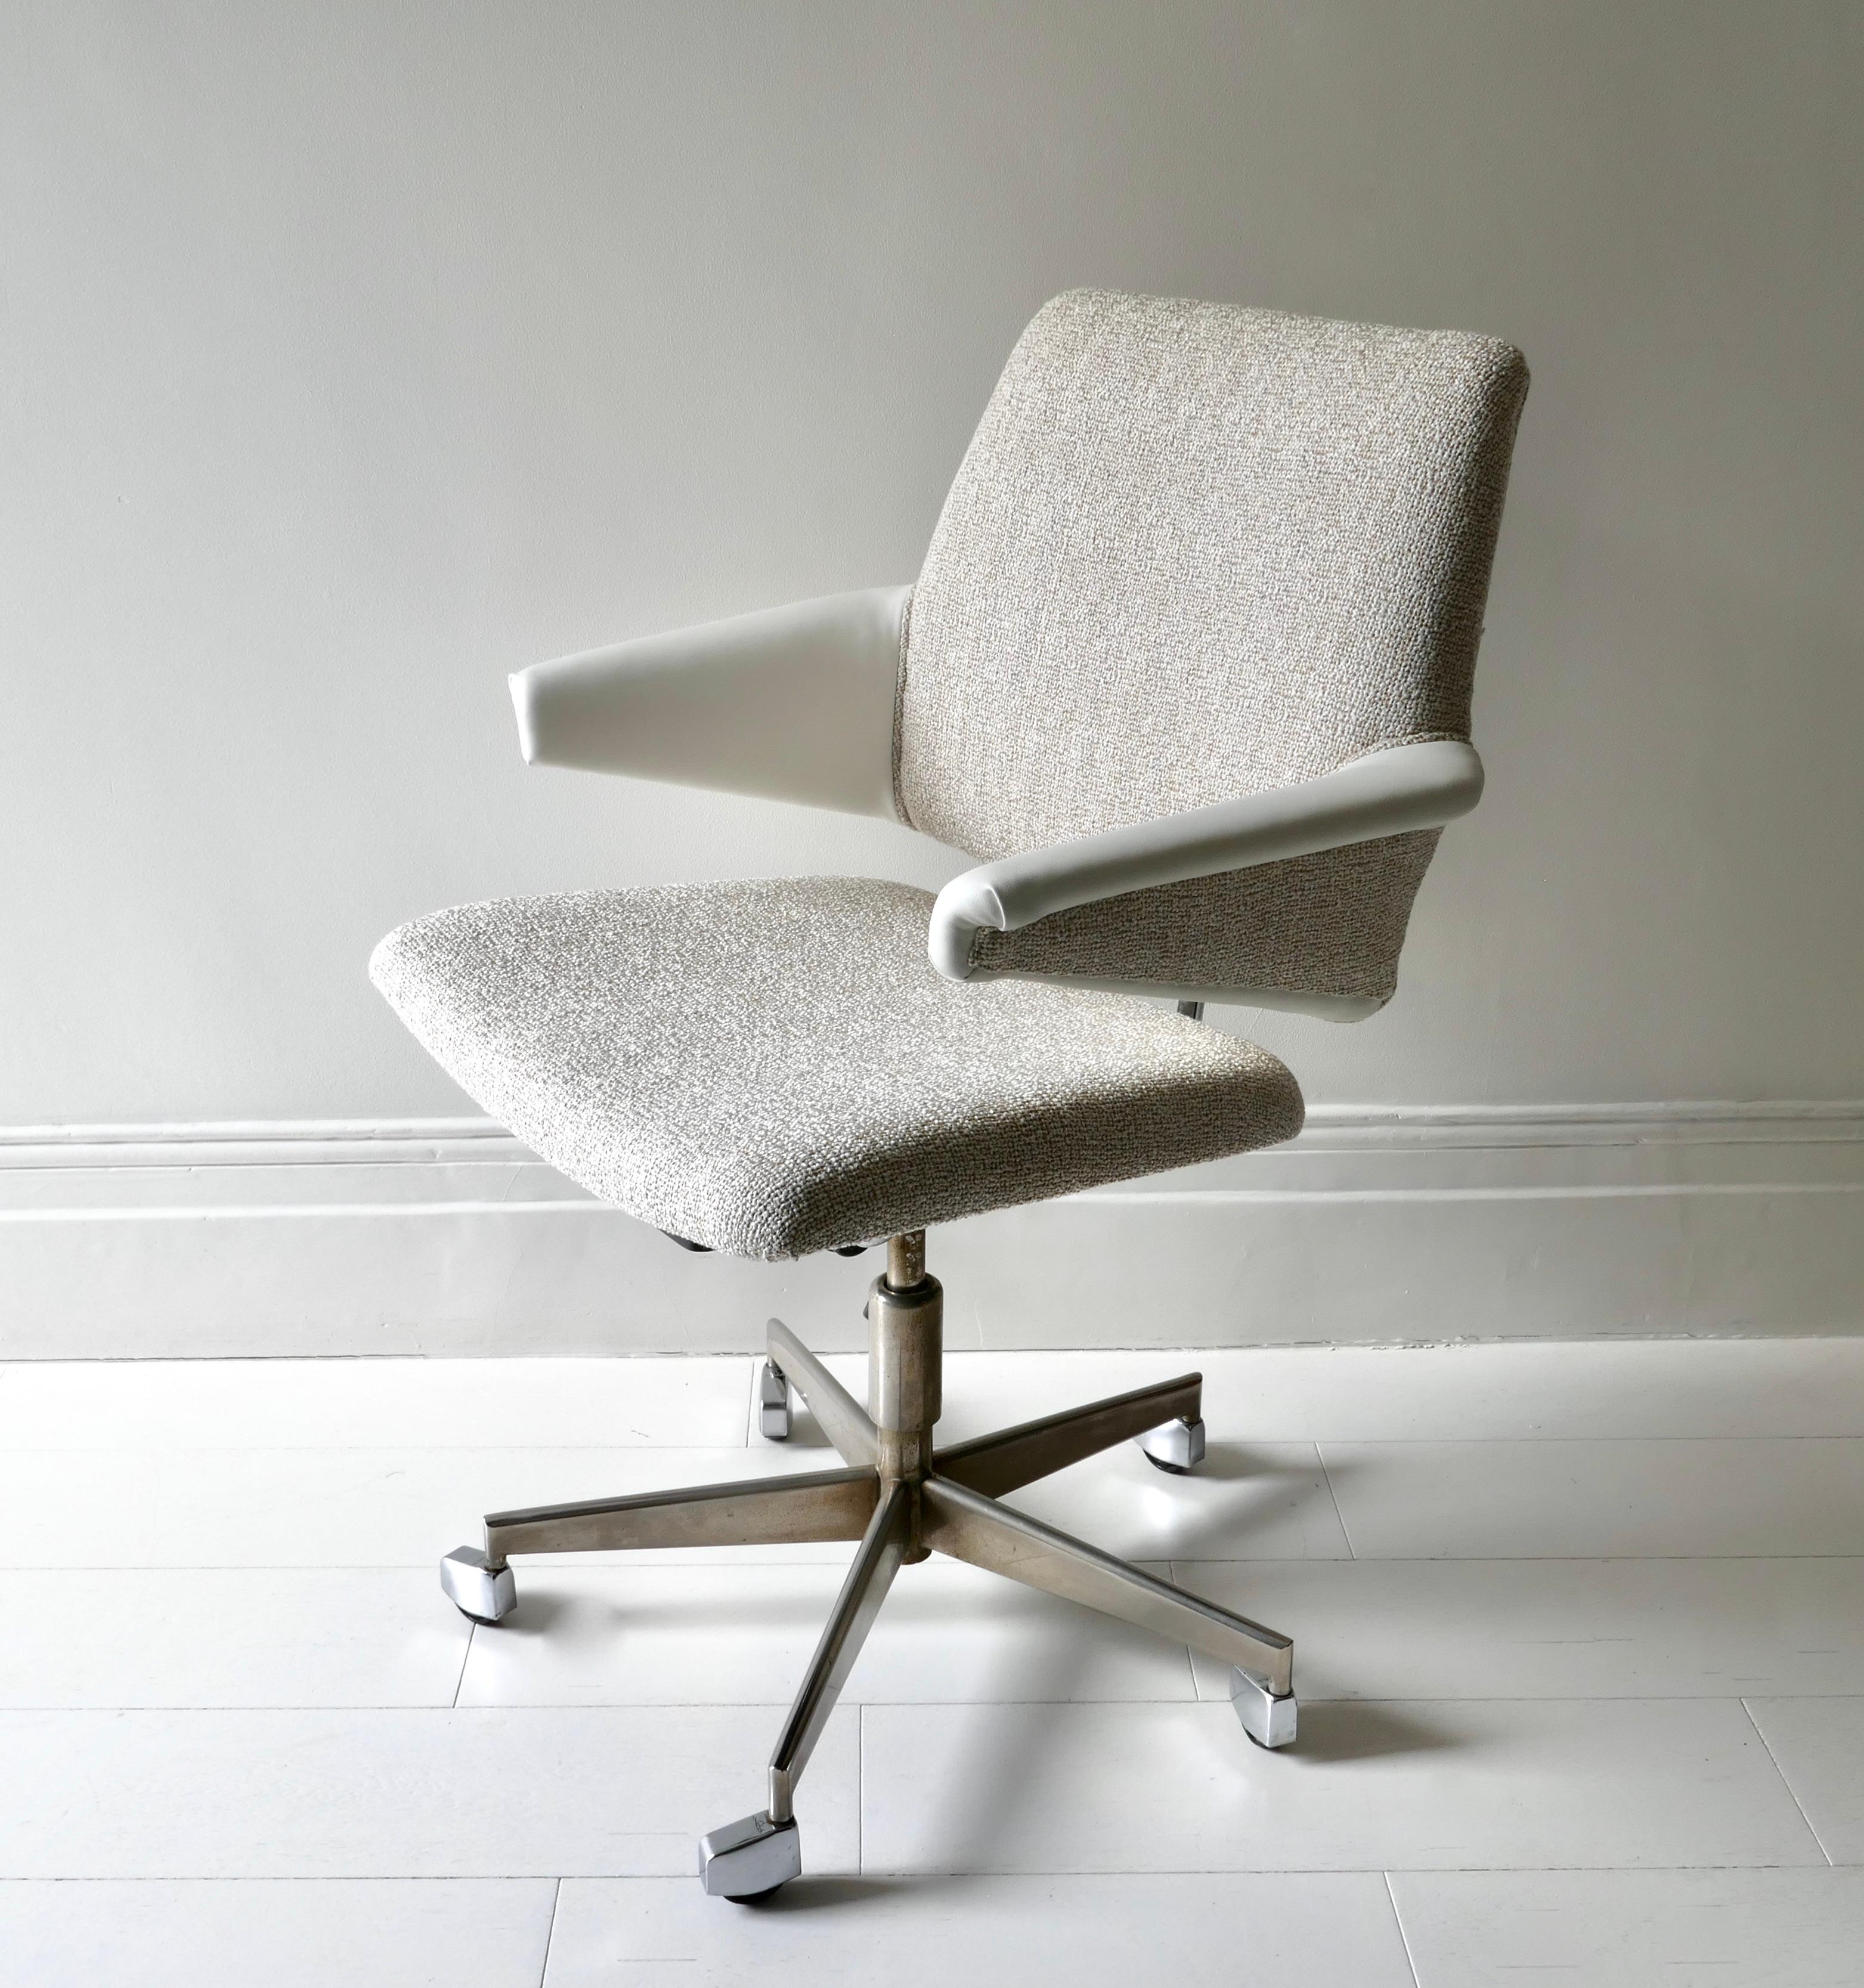 Office armchair designed by J. Jensen for Labof in the 1960s
The construction is made of chromed steel
Reupholstered with boucle fabric and man made leather armrest for longer resistance to time and usage. 
The armchair has the original manual